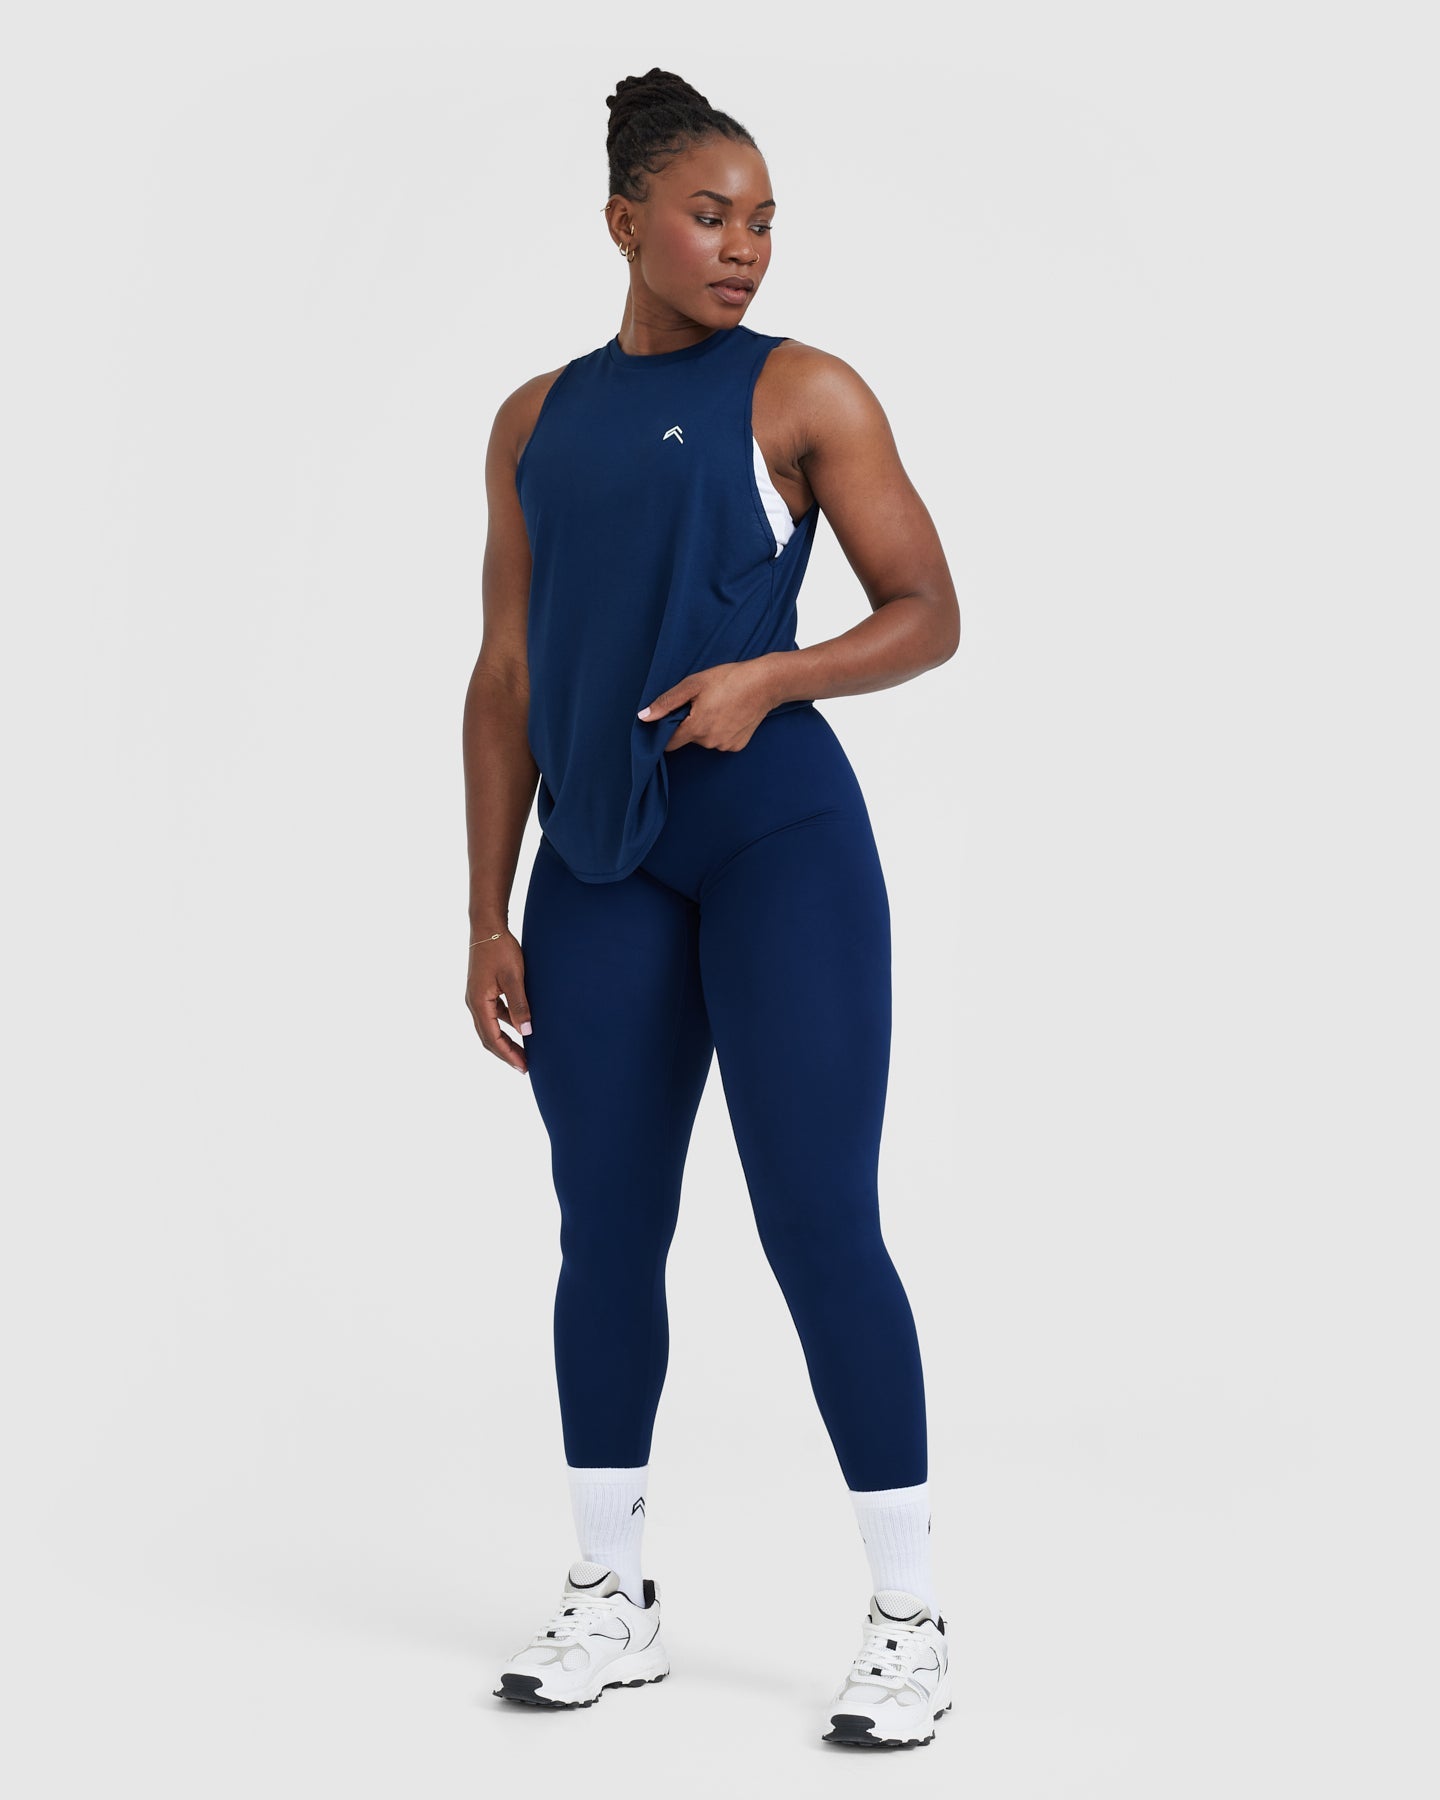 Blue Tank Top Women's - Midnight Go To Muscle Vest | Oner Active US